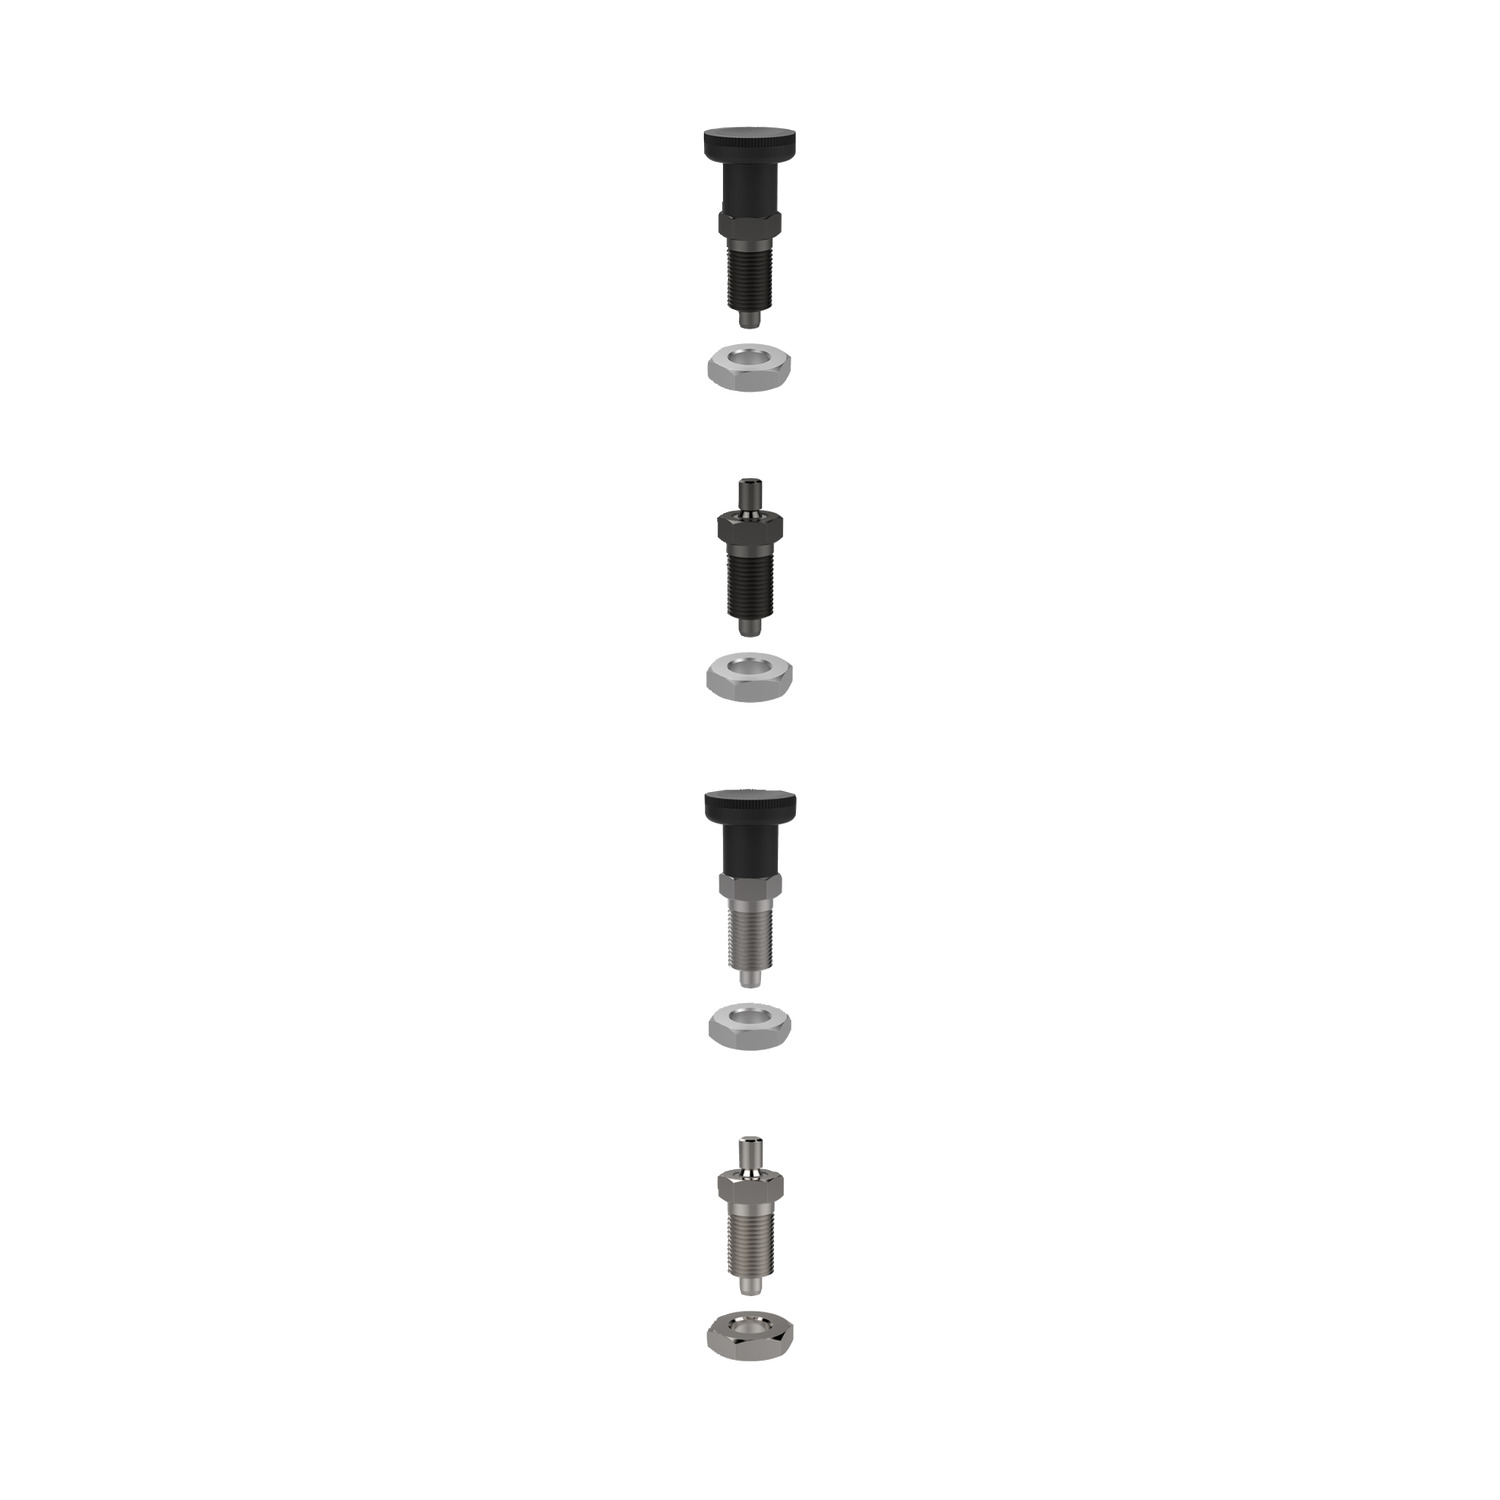 Product 32700, Index Plungers - Pull Grip non-locking / 